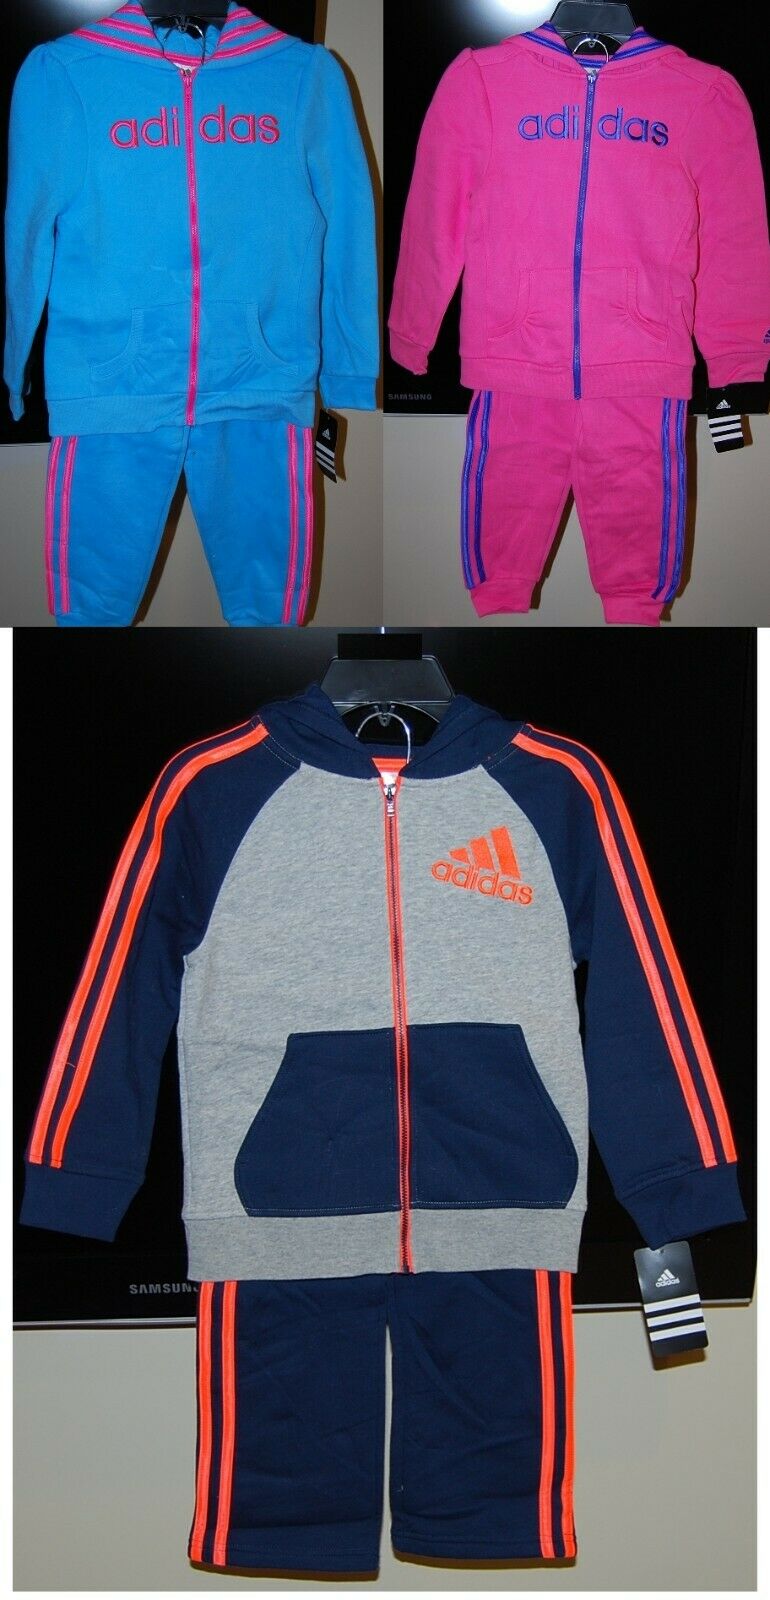 Authentic Adidas Children Hooded 2 Piece Active Wear Sets Boys And Girls $54 Tag